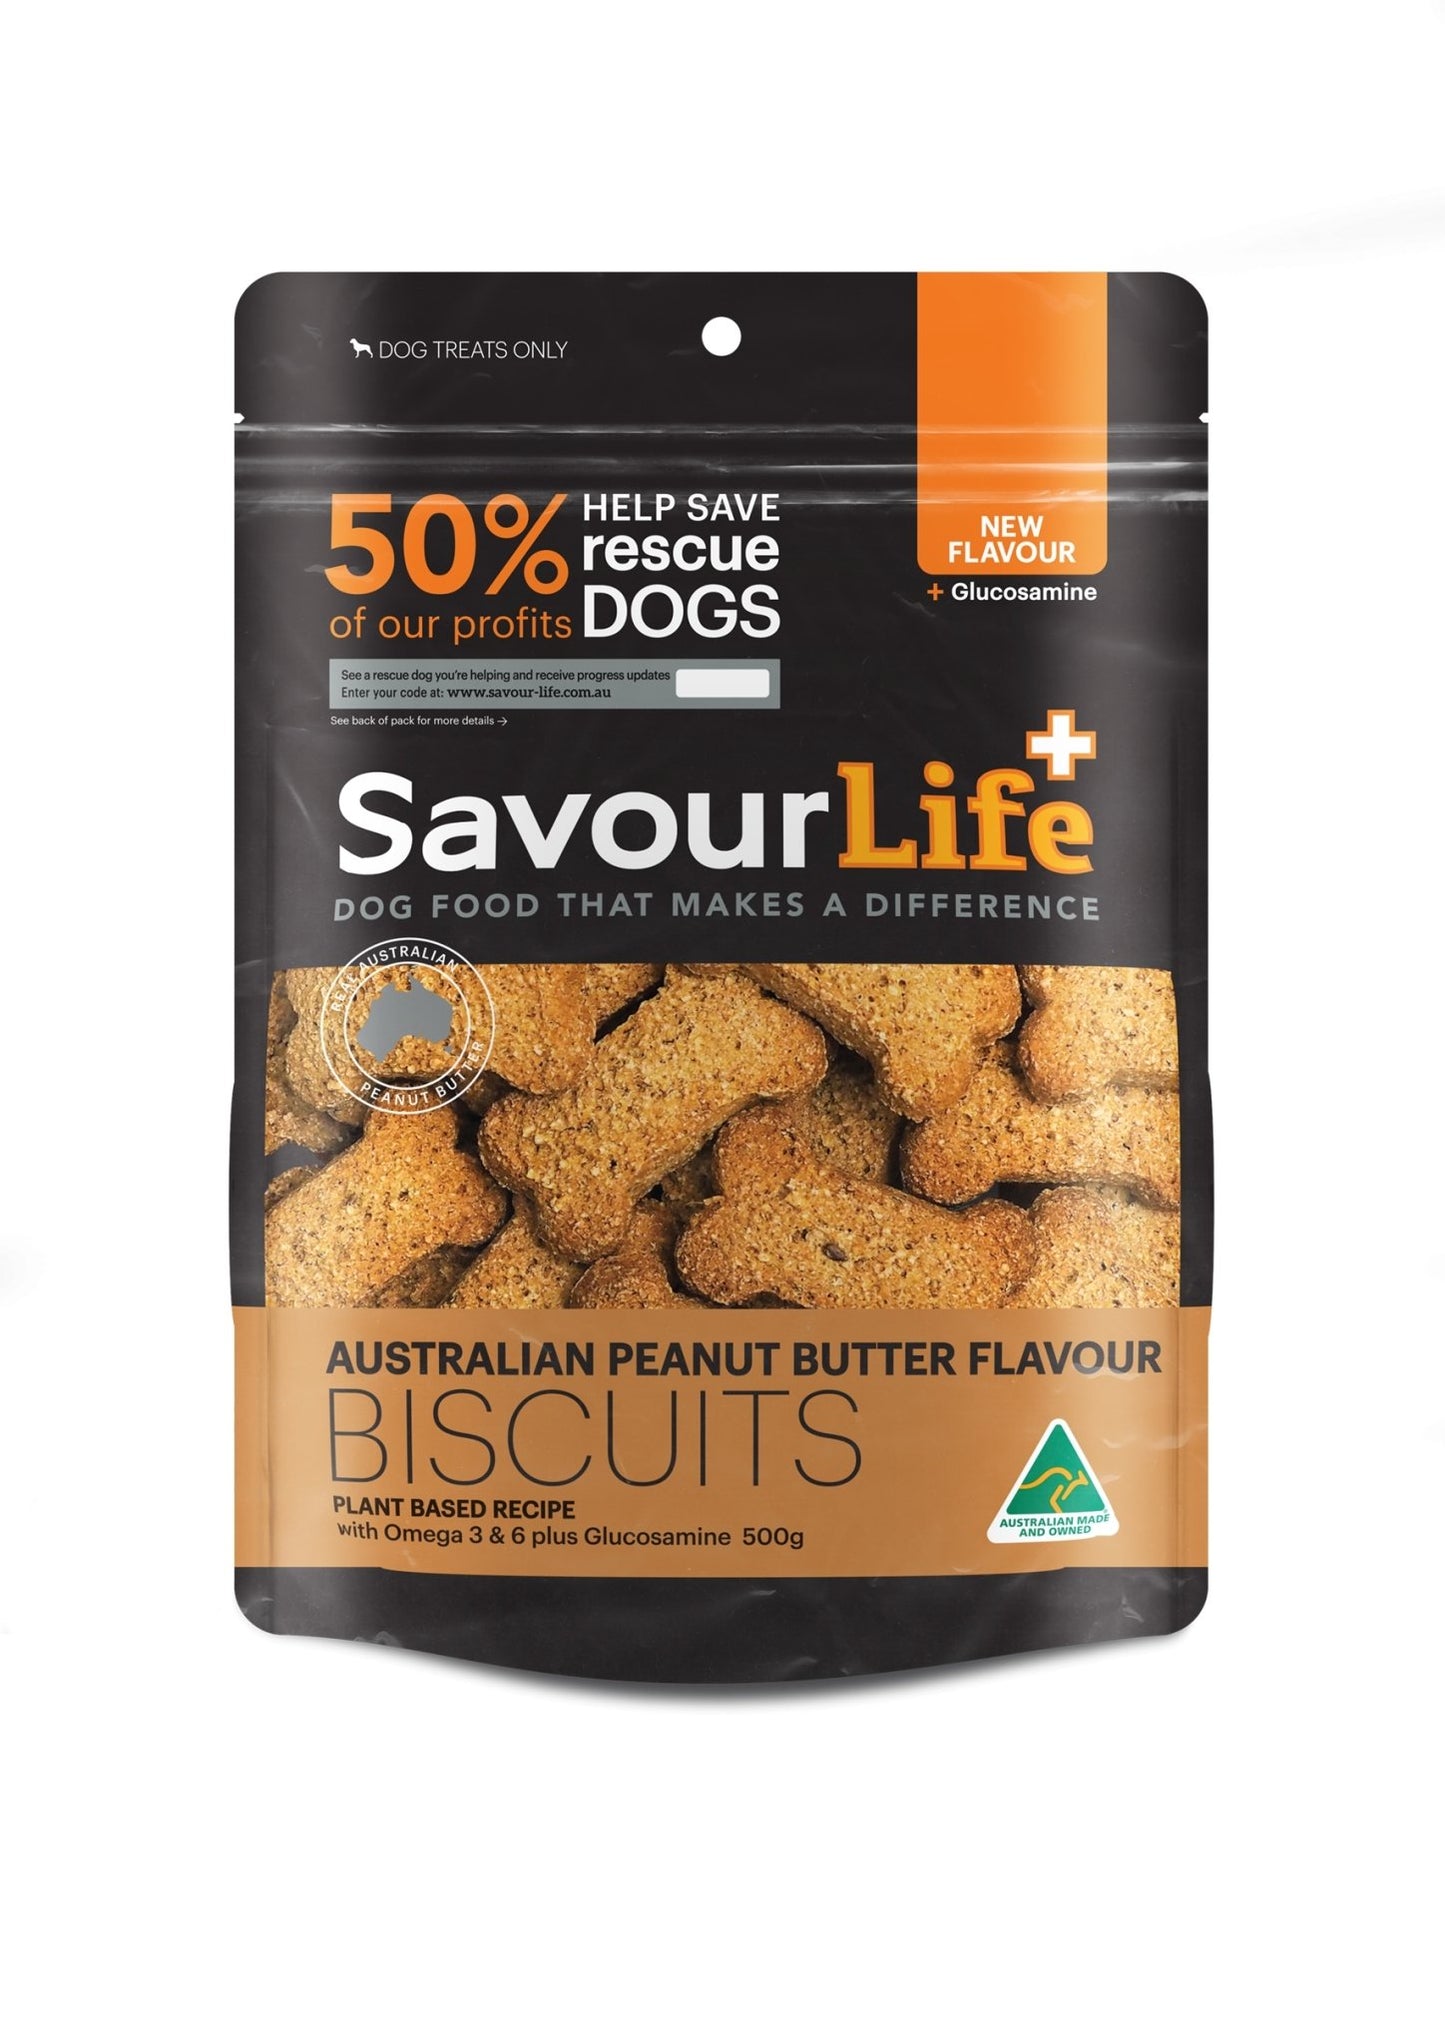 SavourLife Biscuits 500g Peanut Butter - Woonona Petfood & Produce